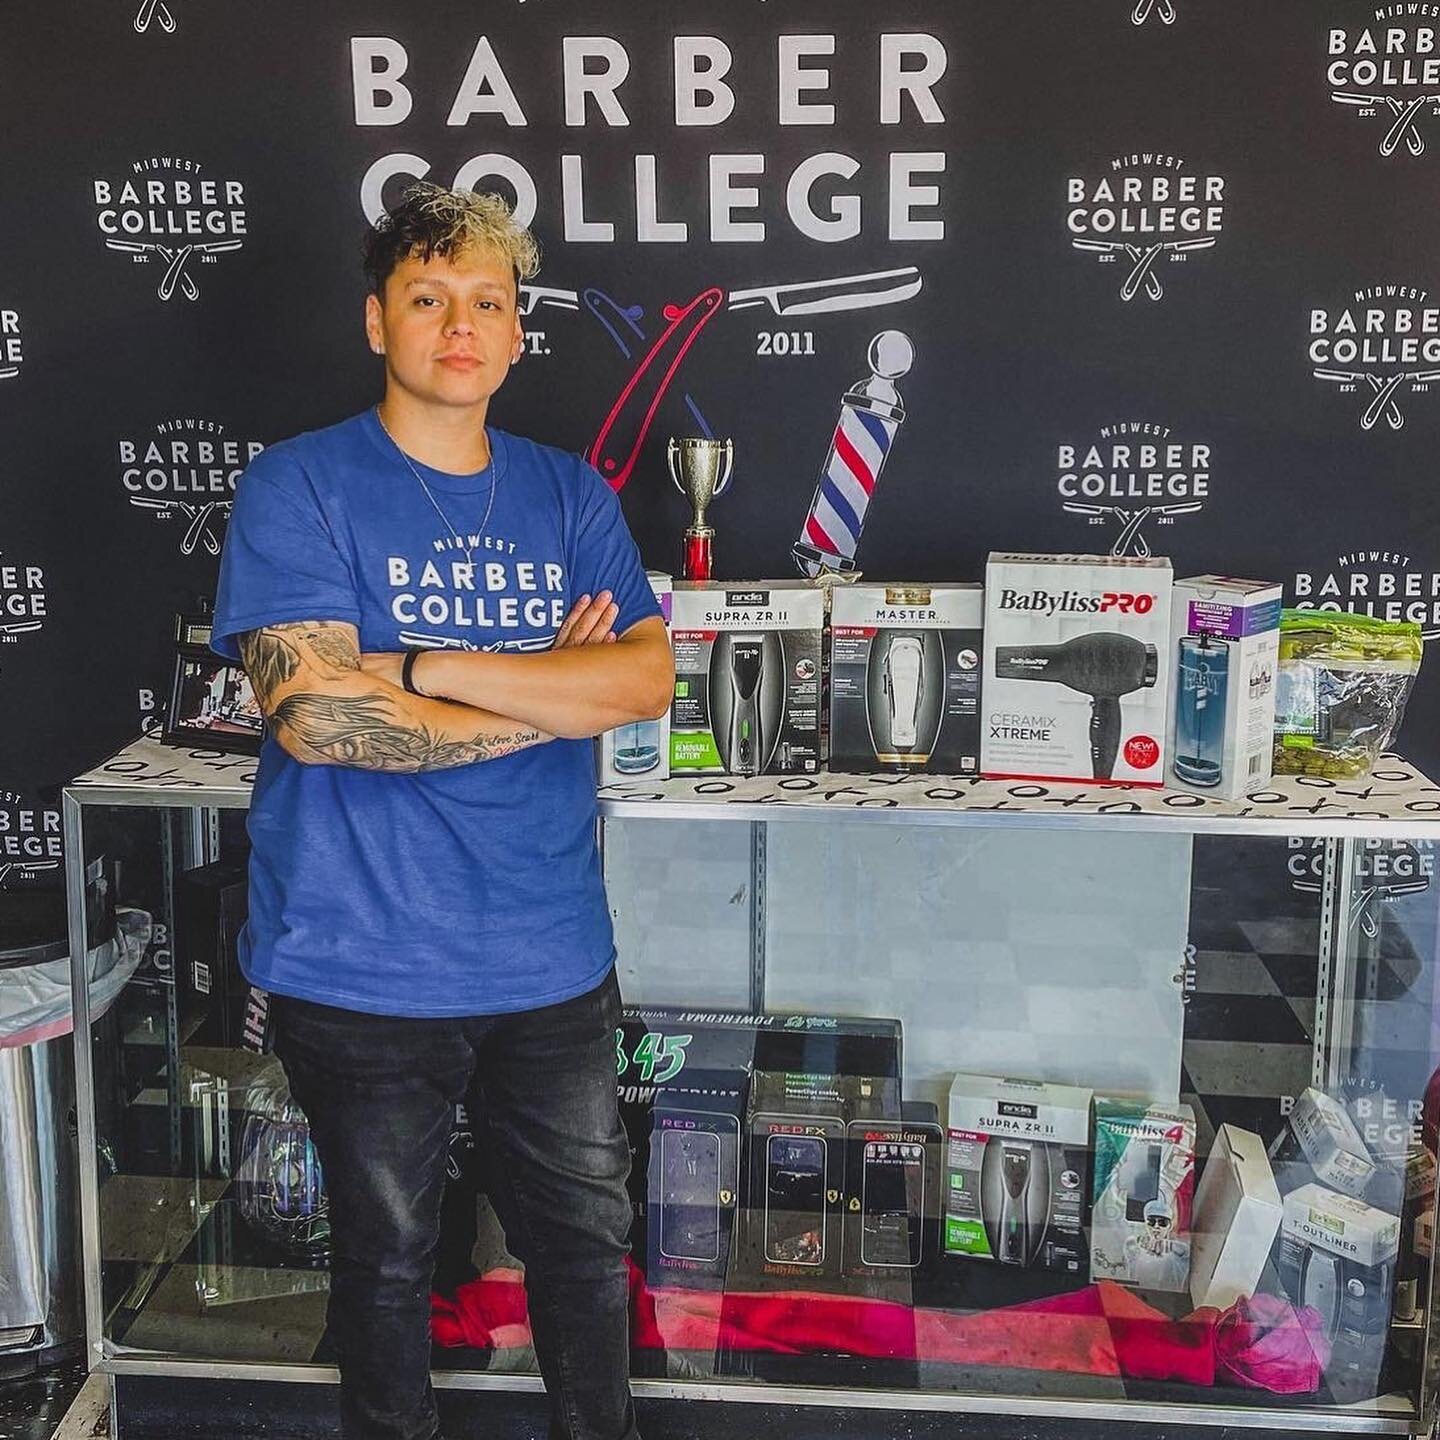 Congrats Chris G. for graduating to the floor!! Check out his new student barber kit. He&rsquo;s hitting the floor in style! 💈✨

Apply today and claim your chair at Midwest Barber College!

#topekabusiness #topekabarber #topcityhair #barbershop #bar